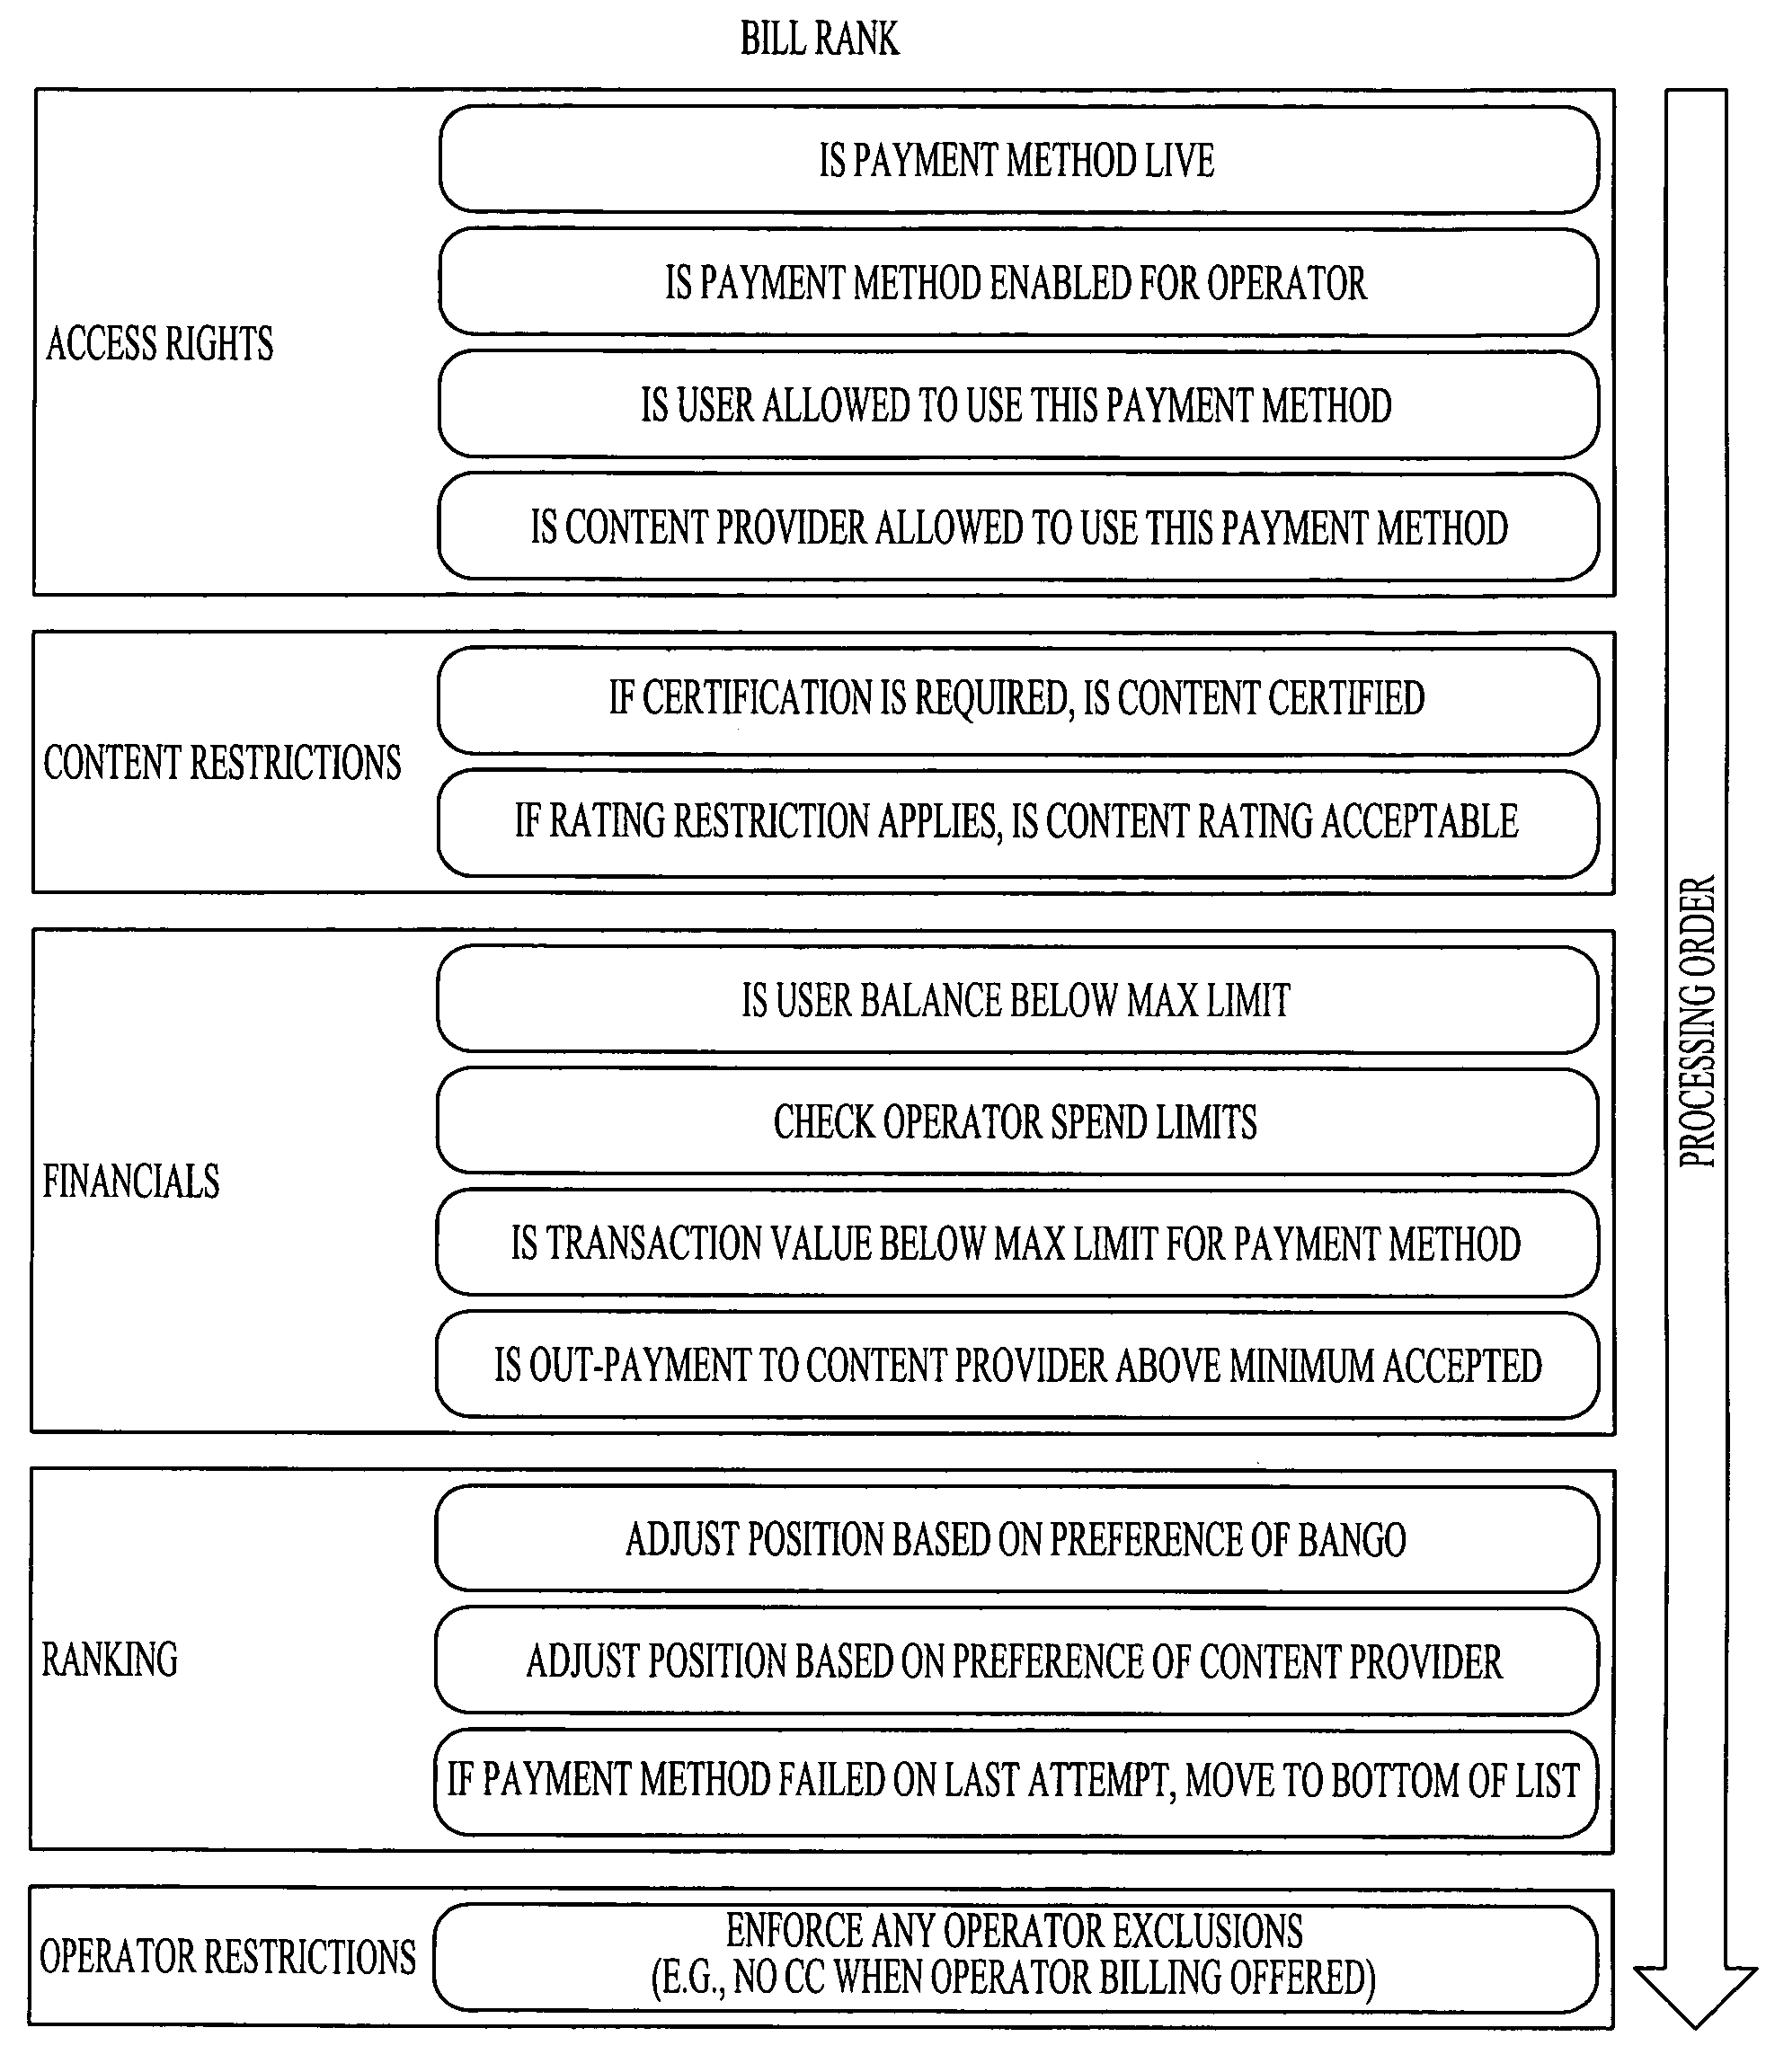 Mobile communication device transaction control systems